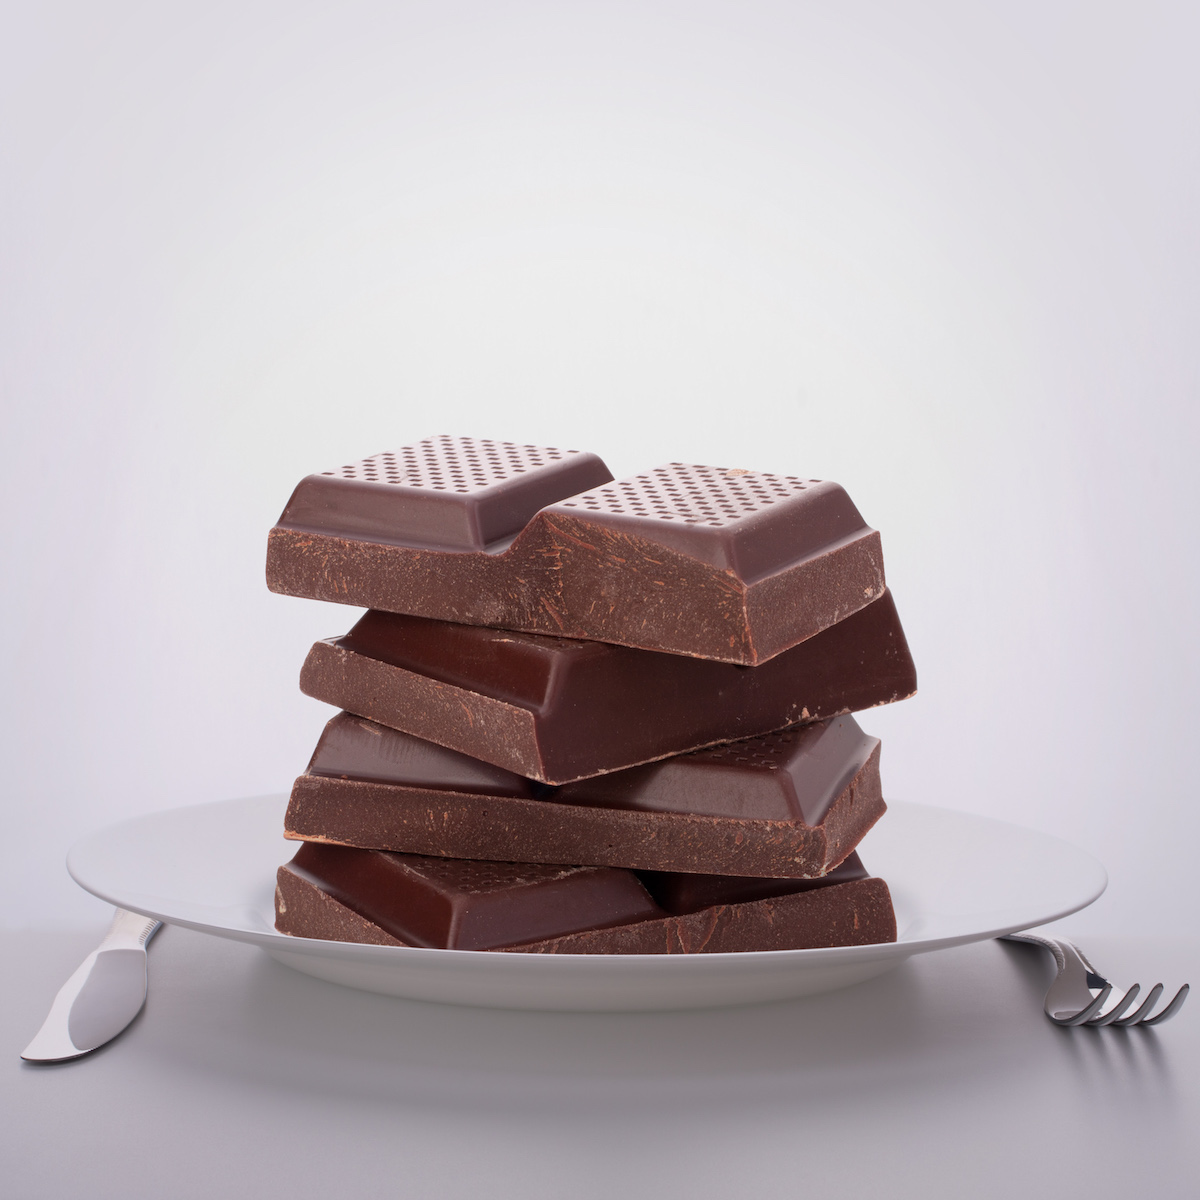 Chocolateros.net: Your New Online Haven for Chocolate Lovers